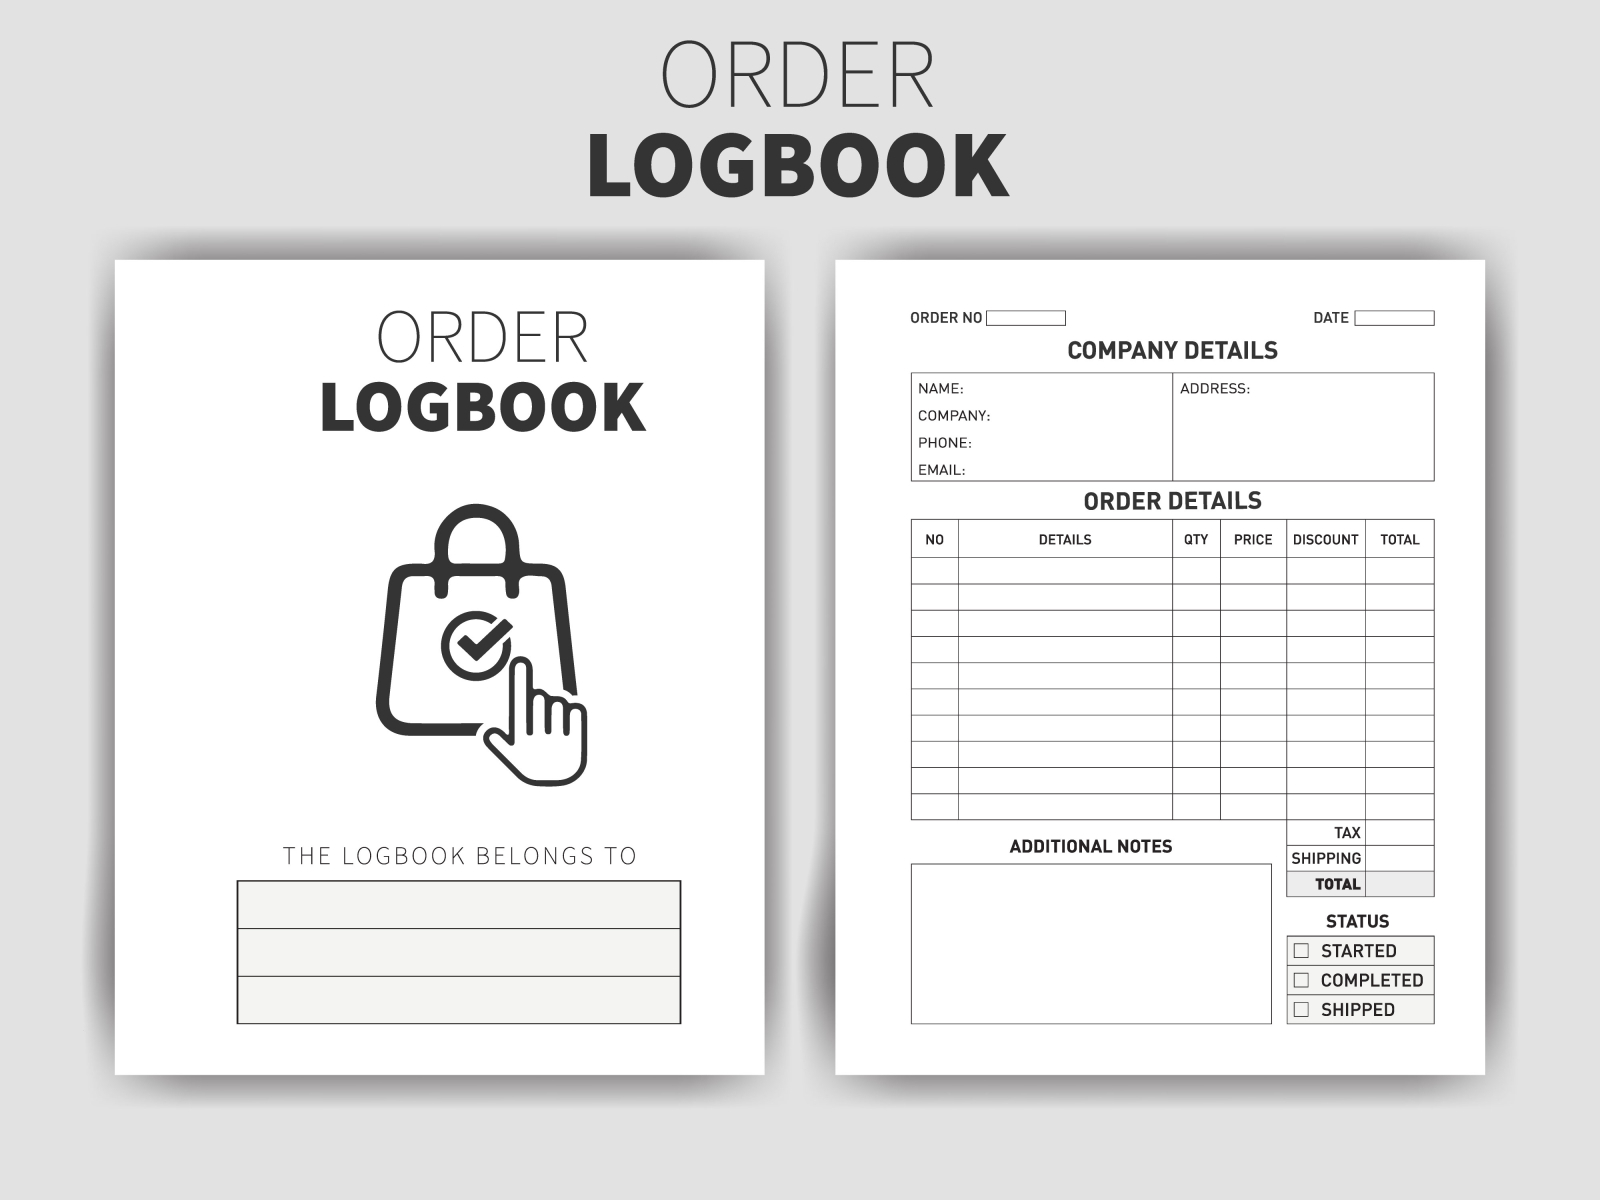 order-logbook-printable-kdp-interior-by-sctch-creations-on-dribbble